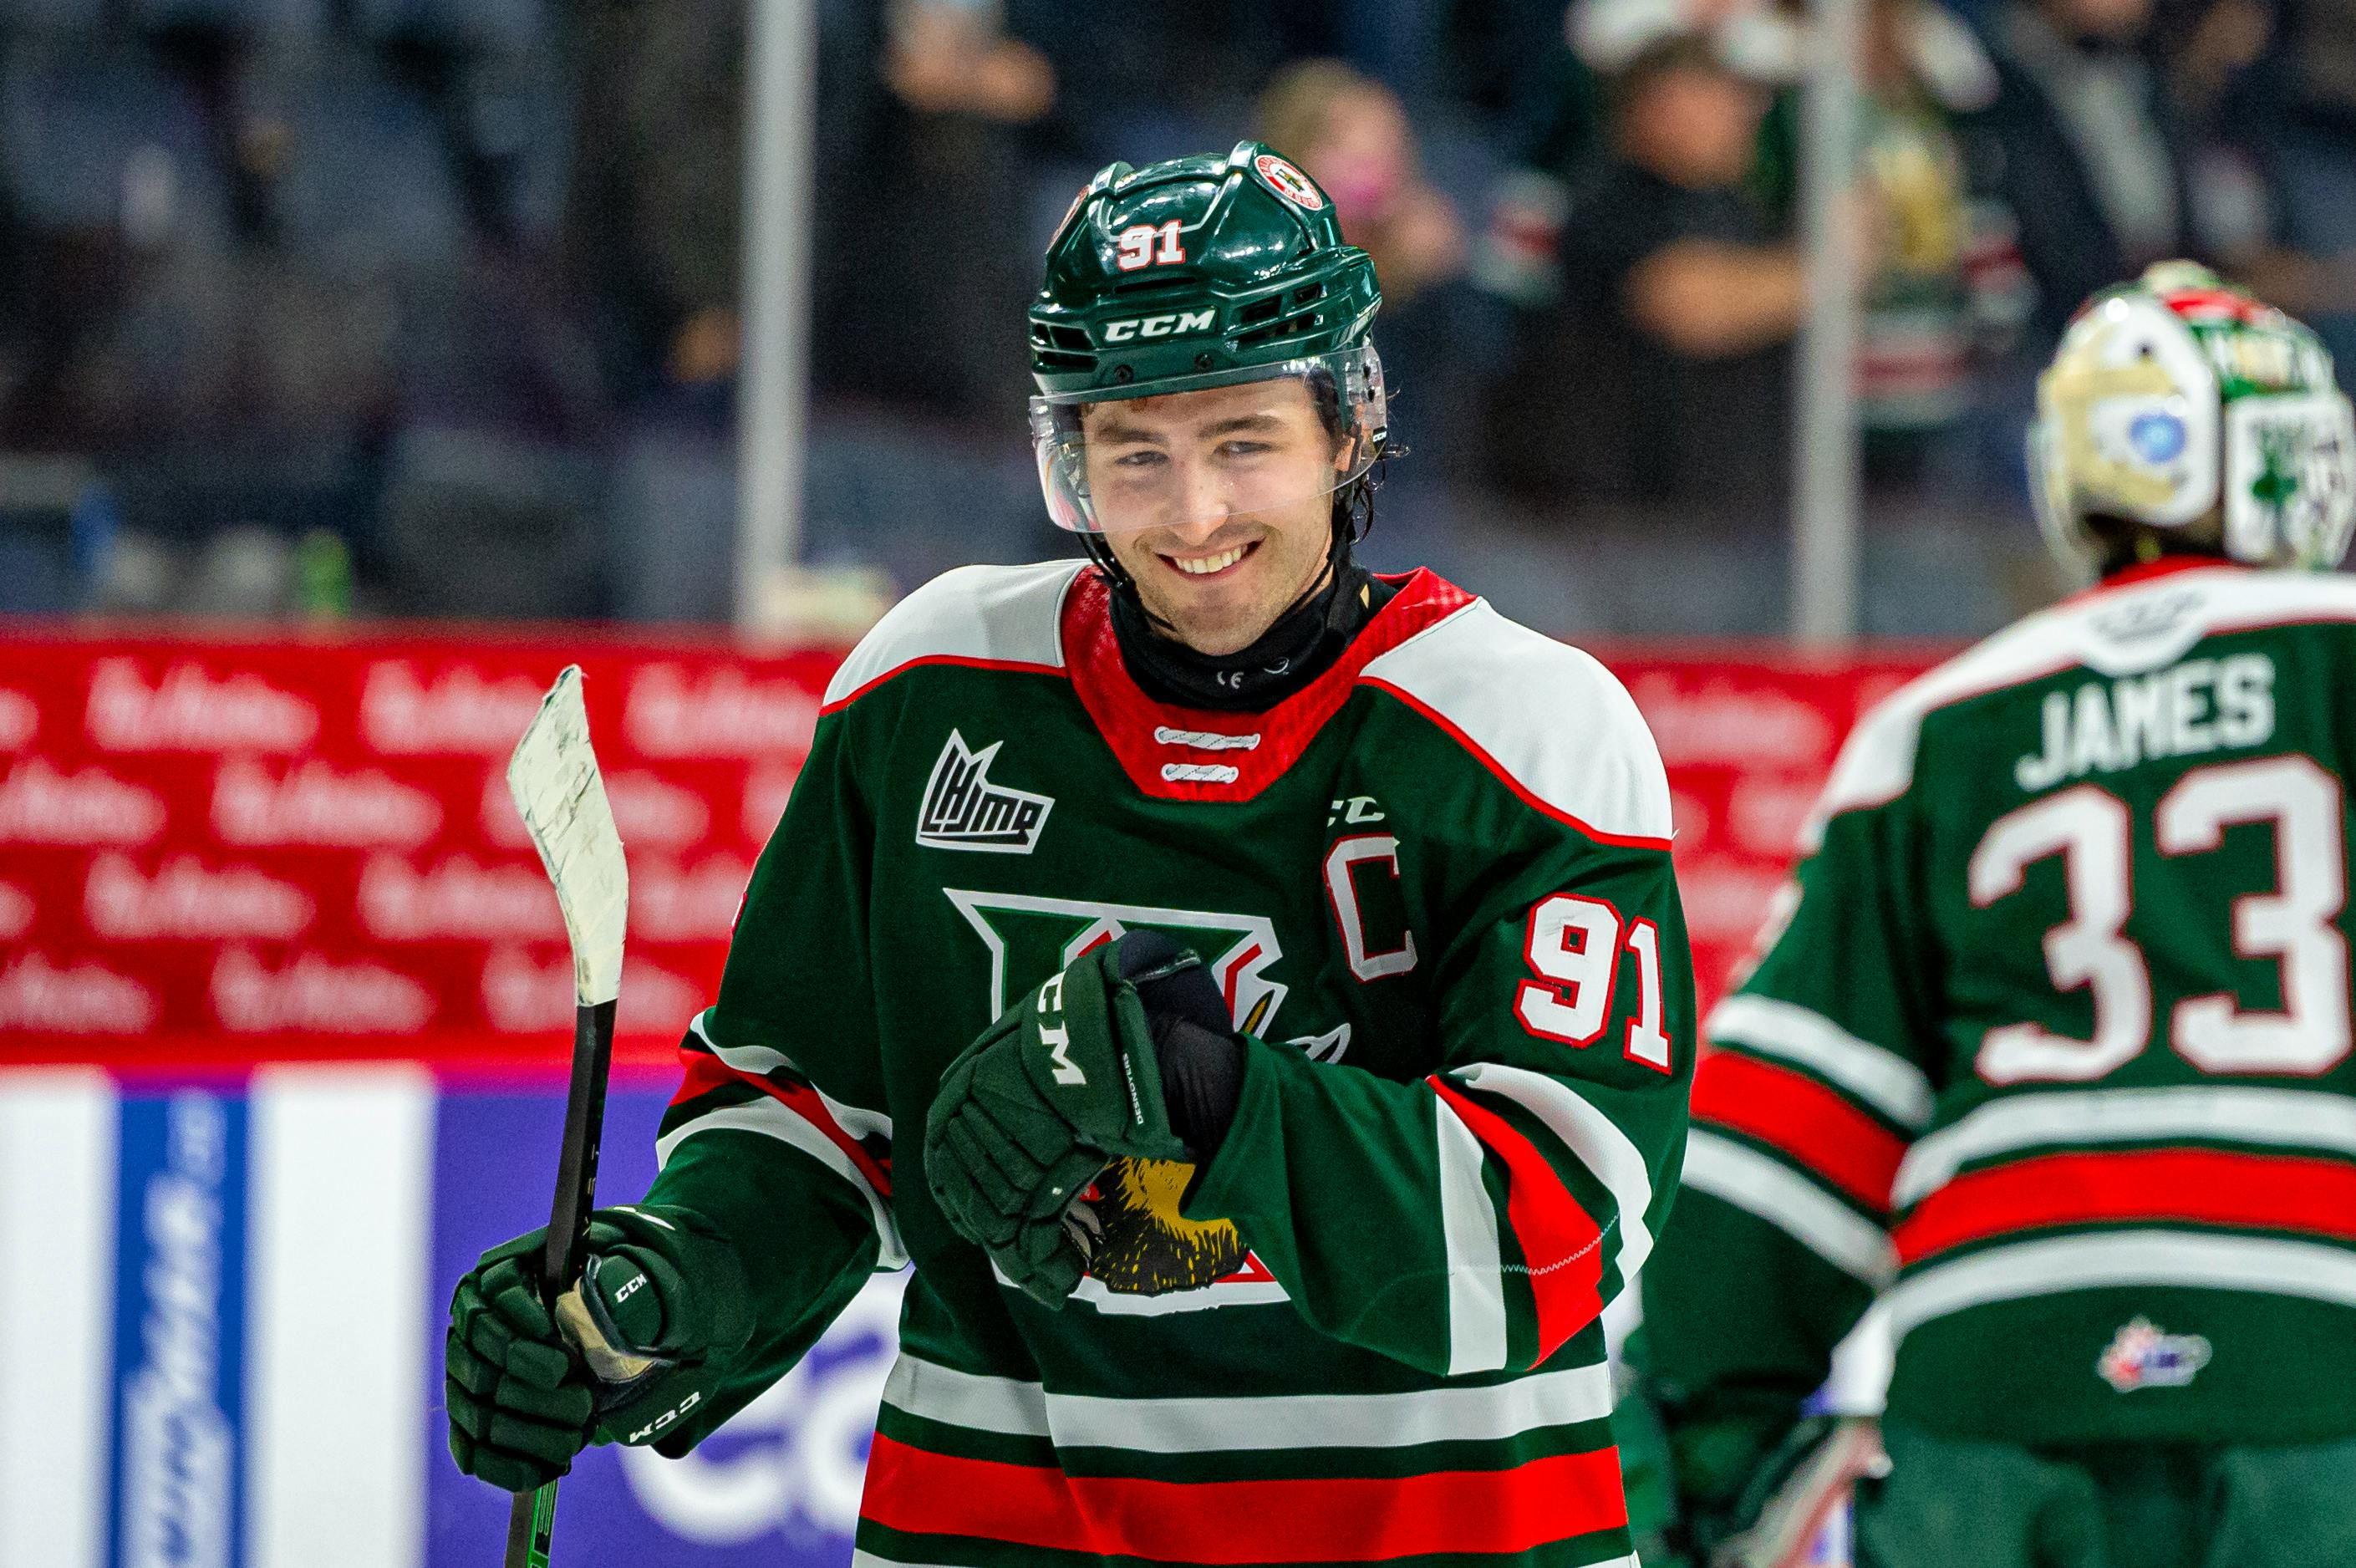 L'Heureux looks to carry on Mooseheads' first-round run at NHL draft